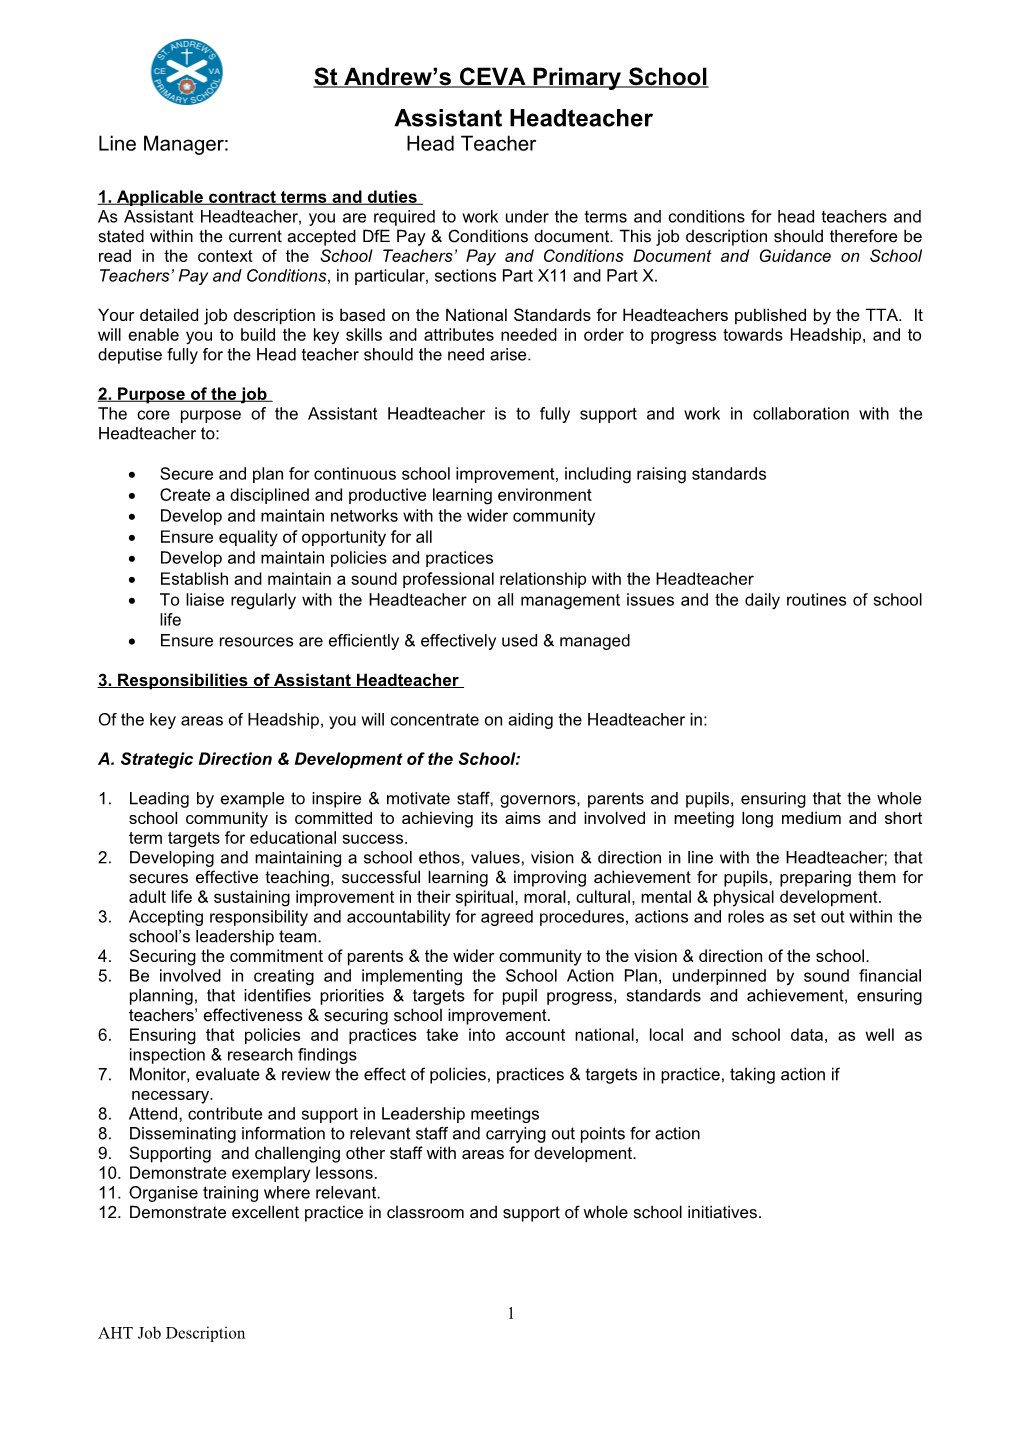 As Deputy Head Teacher, You Are Required to Work Under the Terms and Conditions for Head